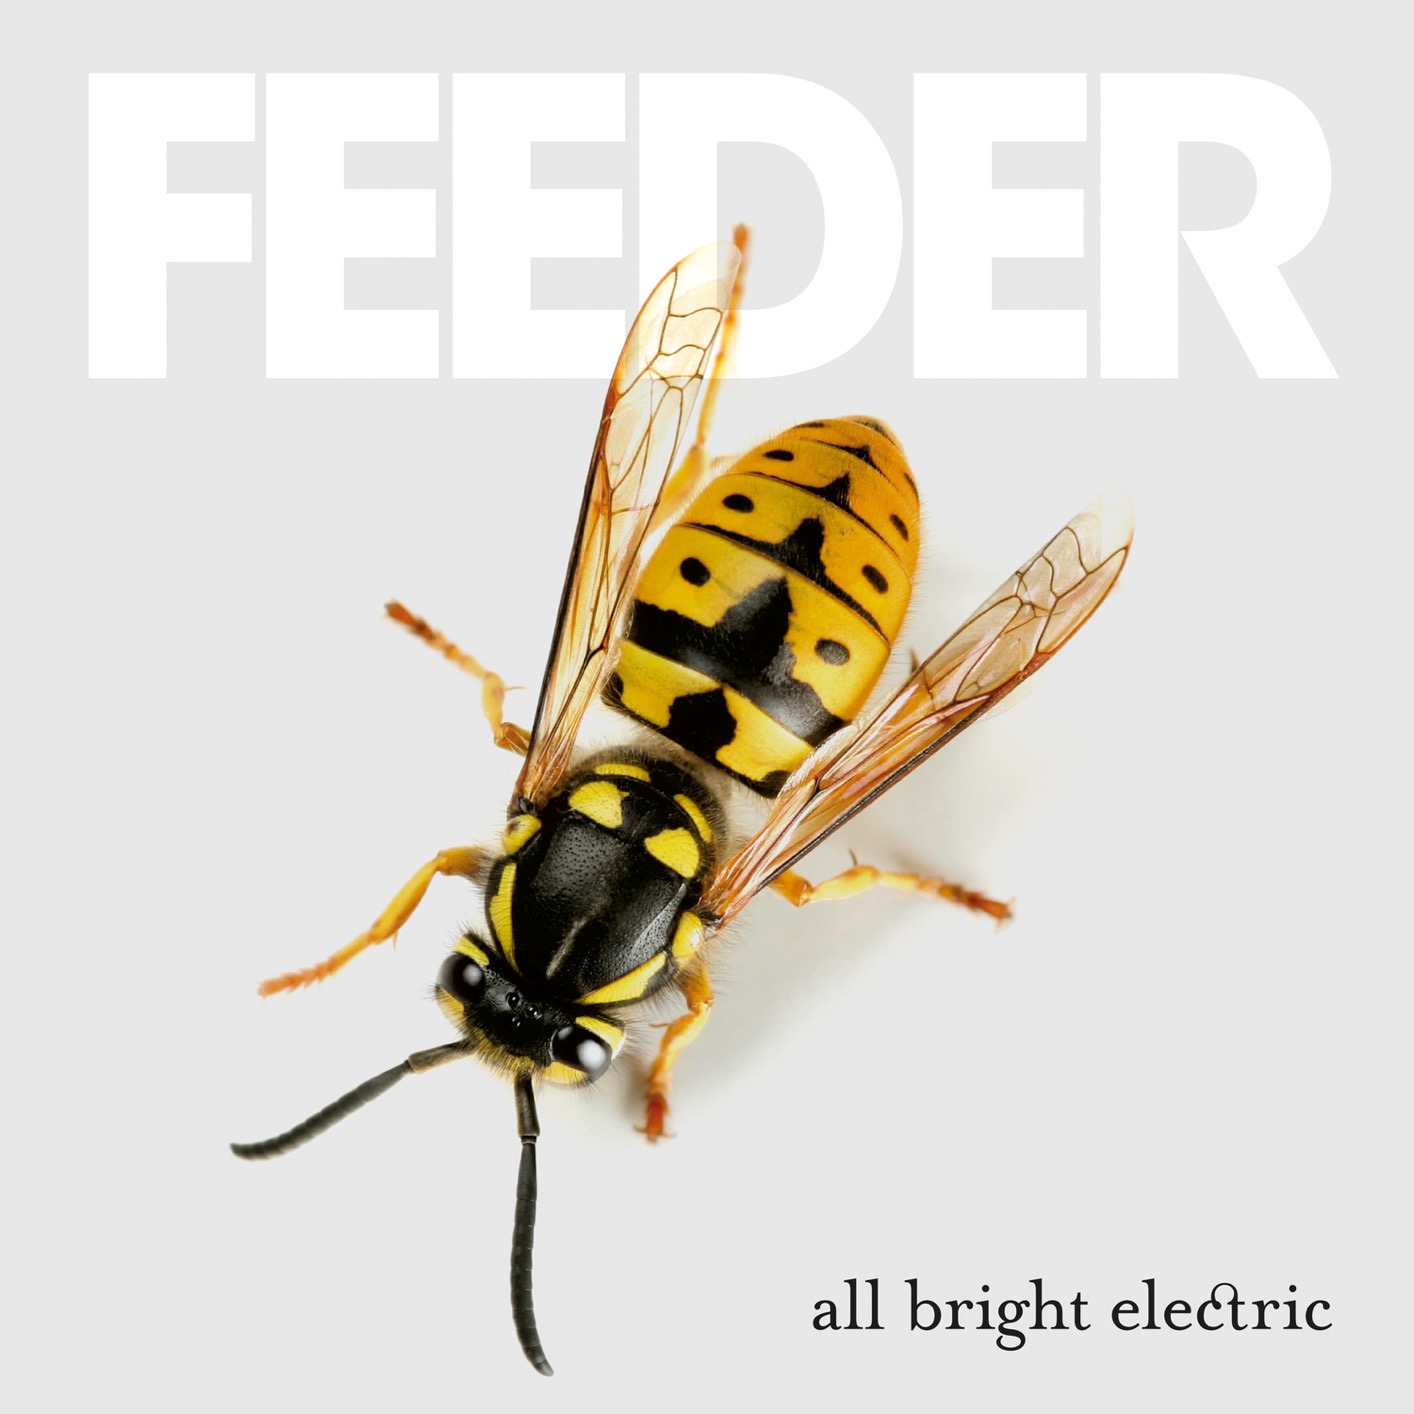 Feeder - All Bright Electric (Deluxe Version) (2016/2018) [FLAC 24bit/44,1kHz]